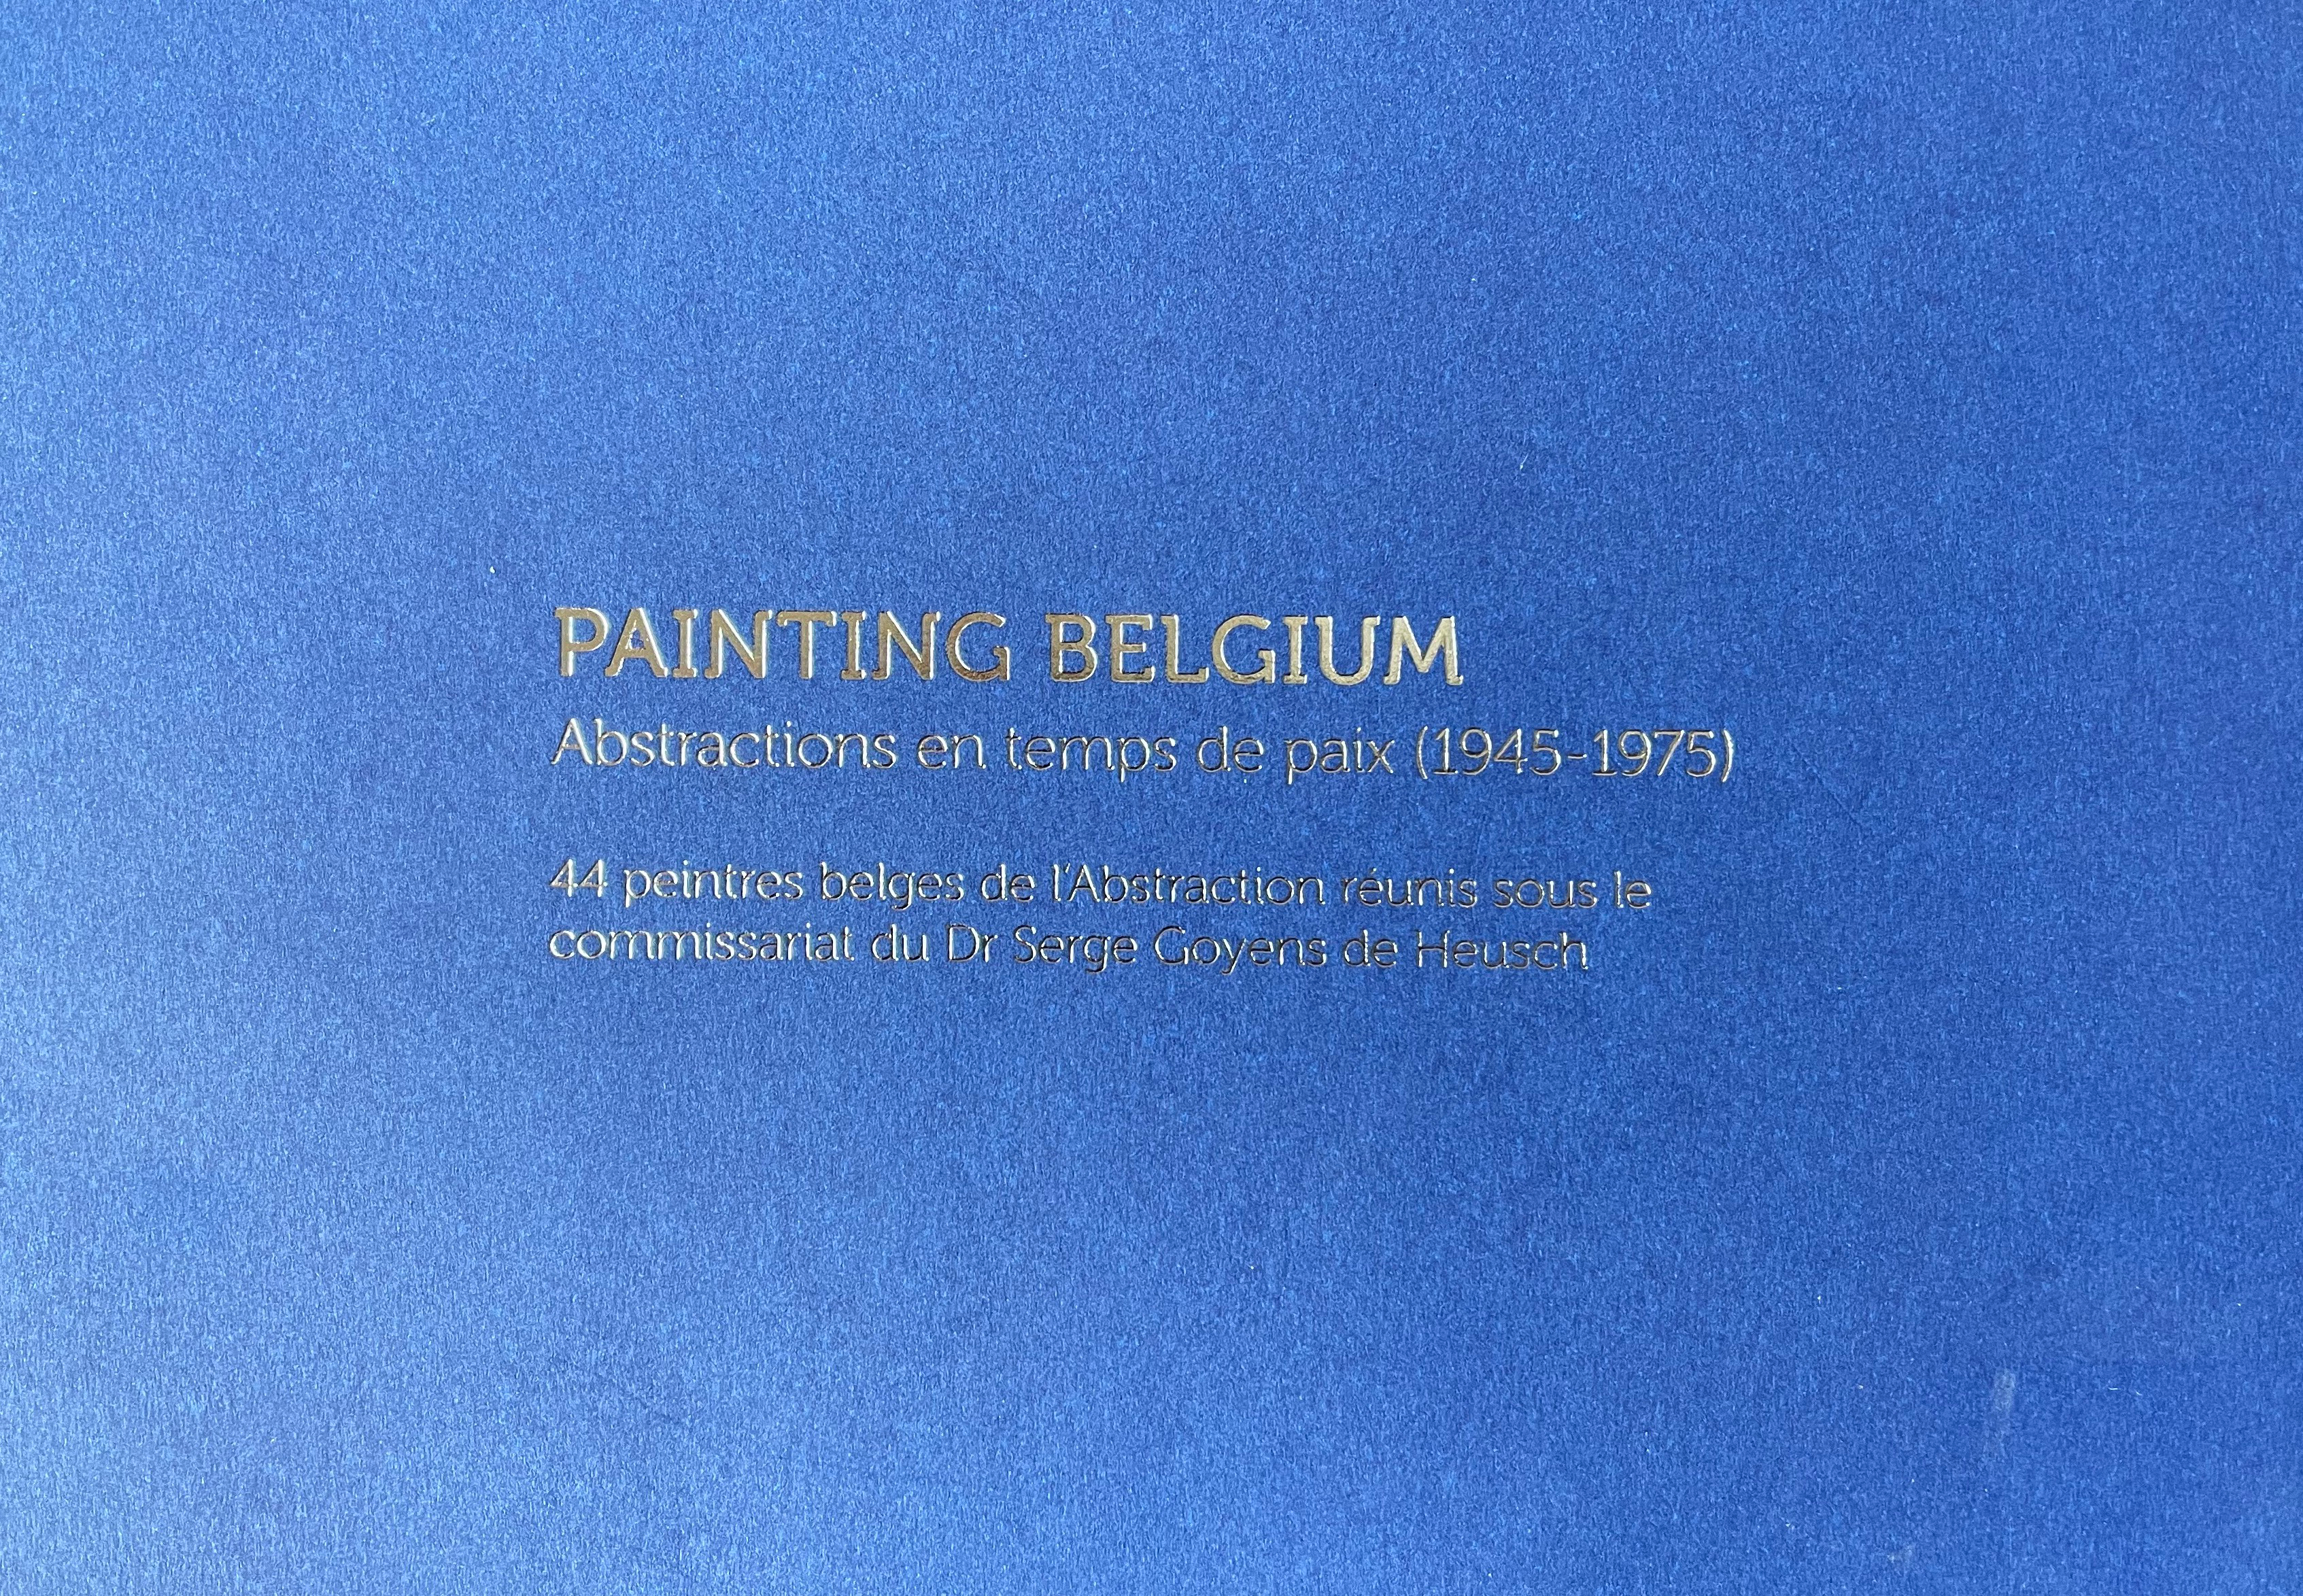 Painting belgium, a patinoire royale, 2019